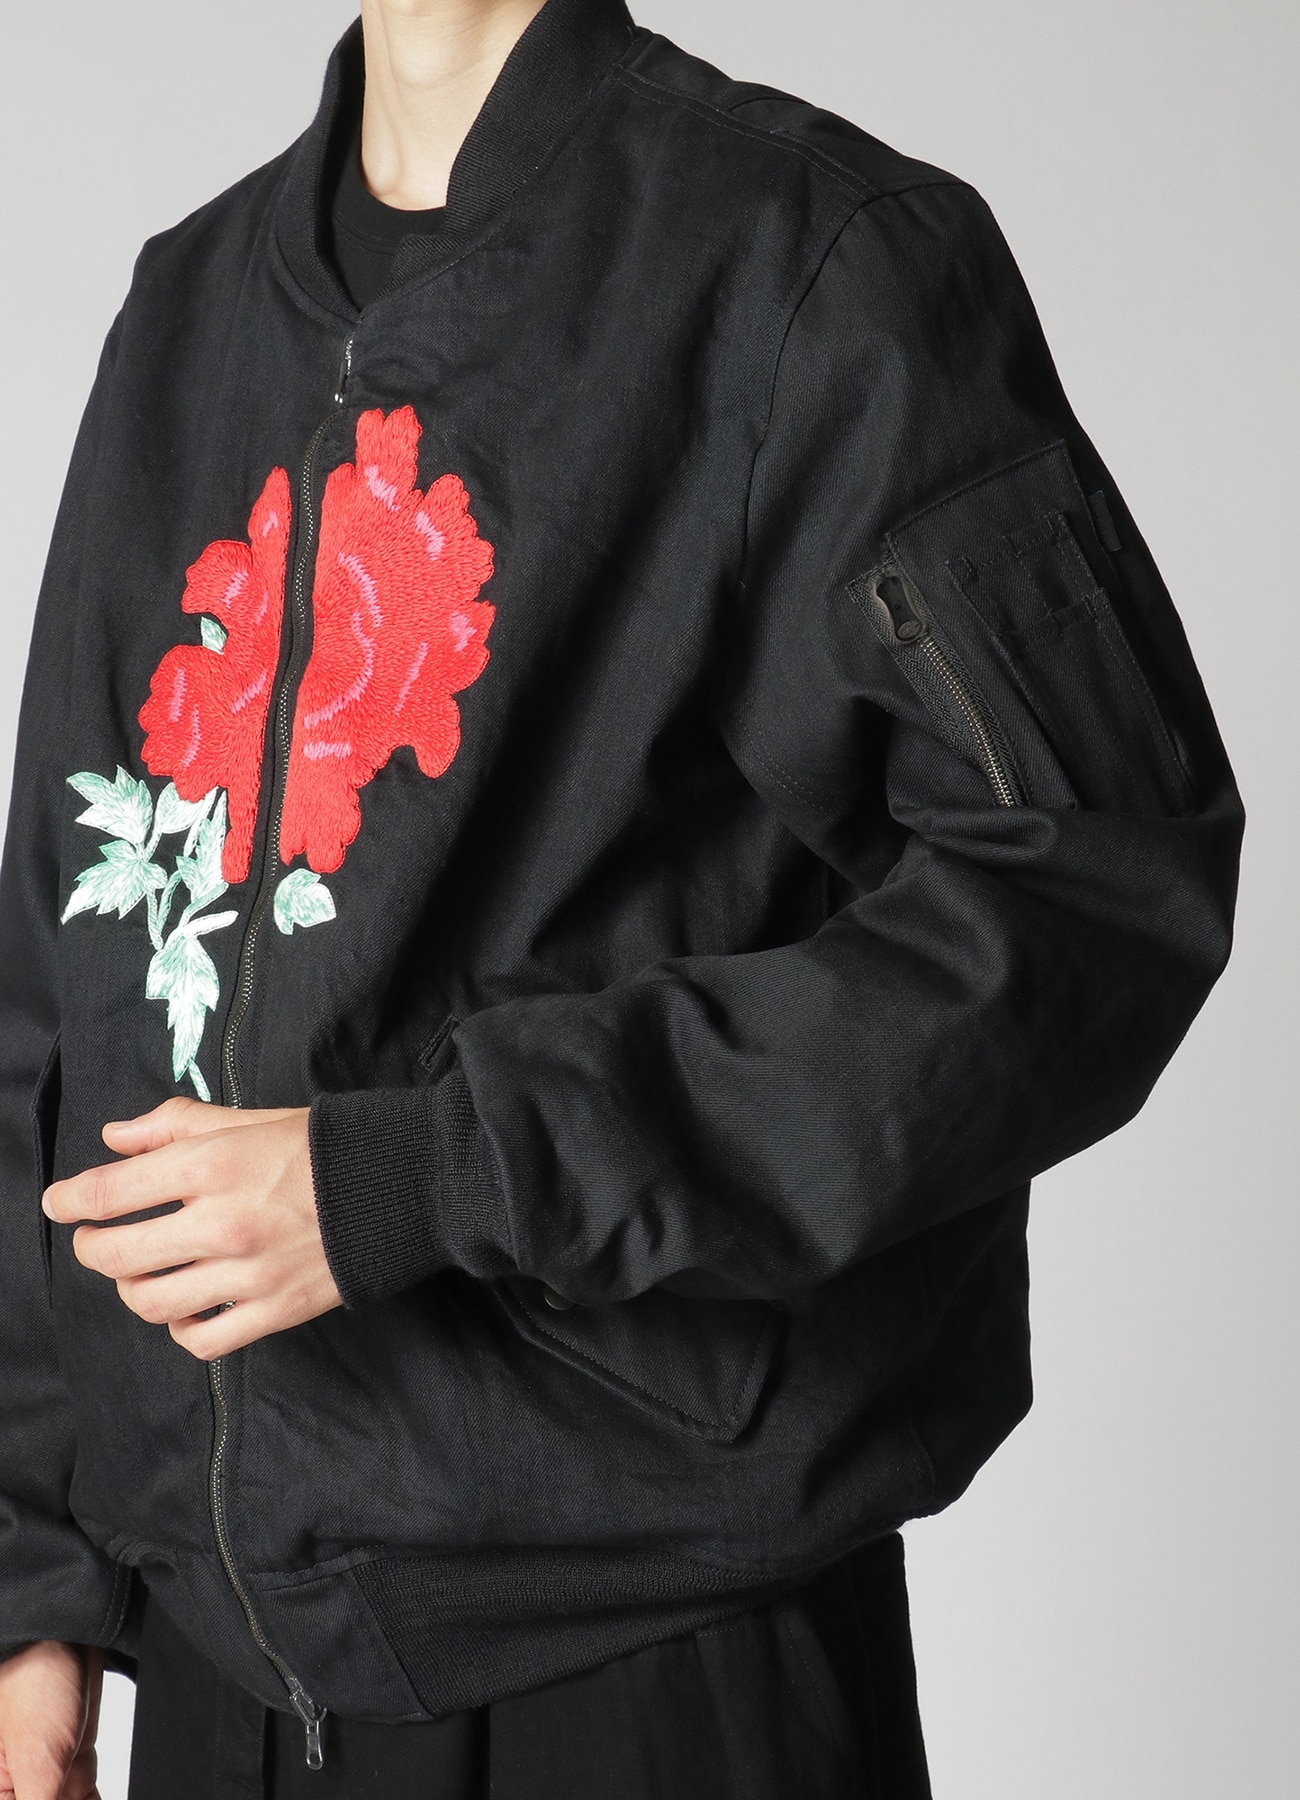 WILDSIDE × NOMA t.d. HAND EMBROIDERY Flight Jacket